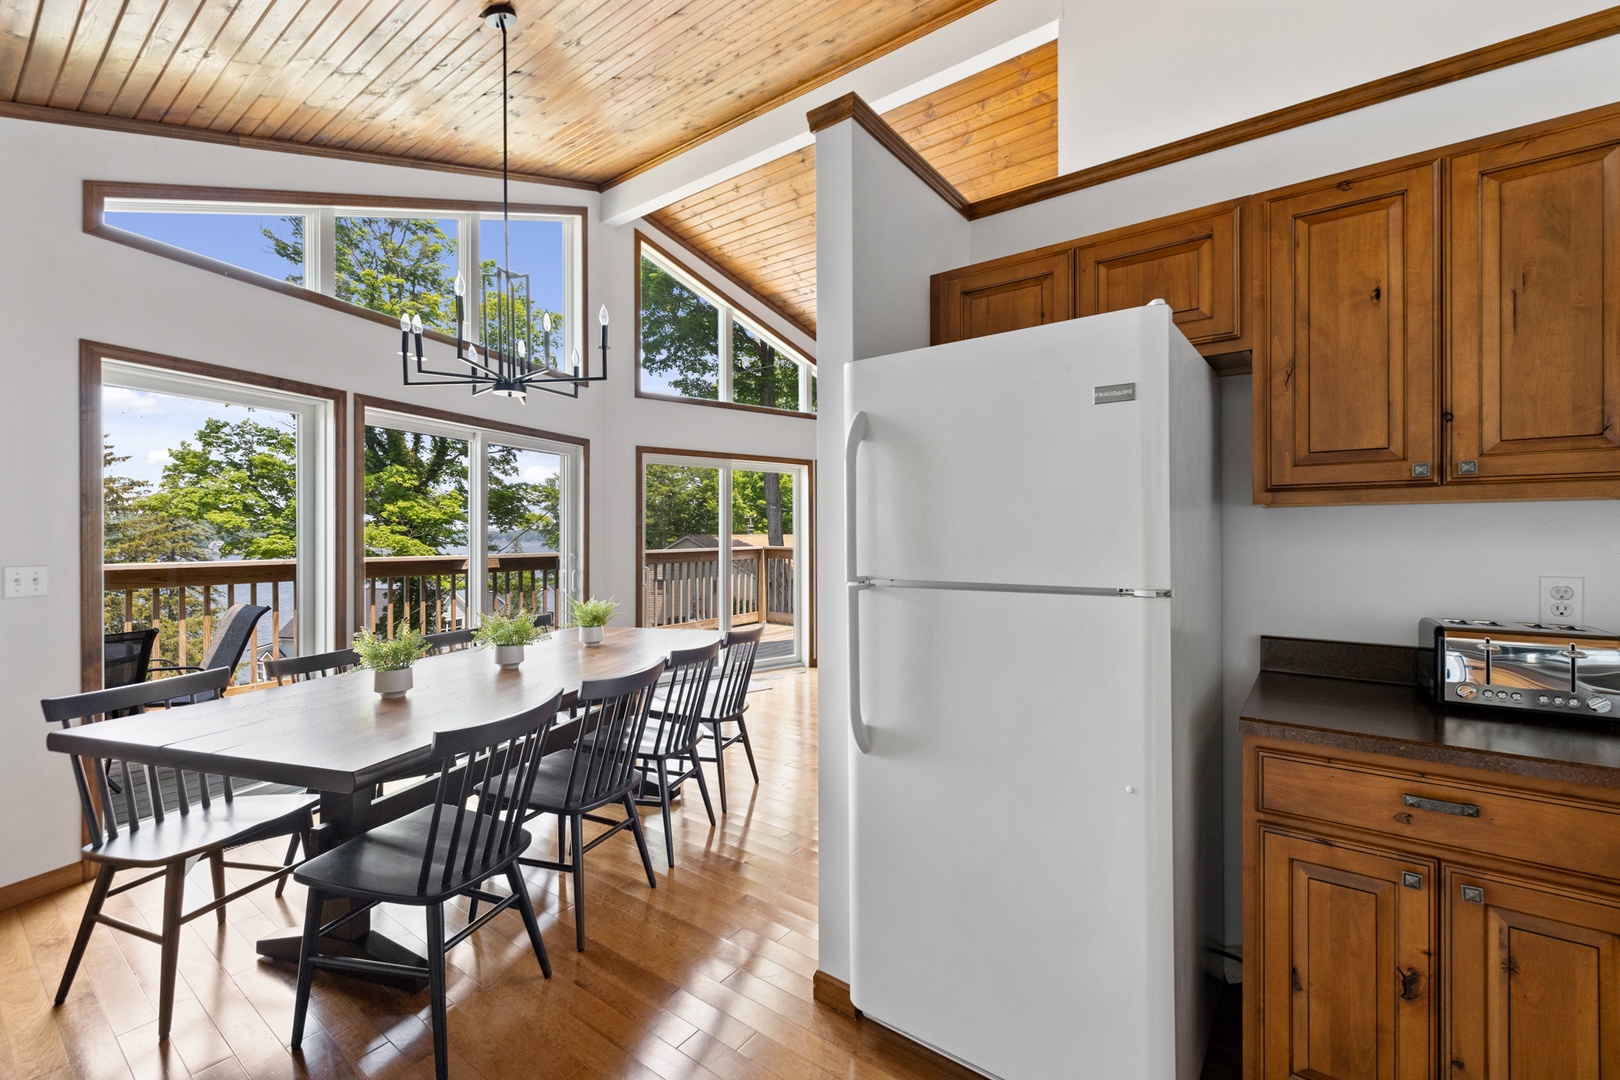 Full size appliances offer every convenience of home.